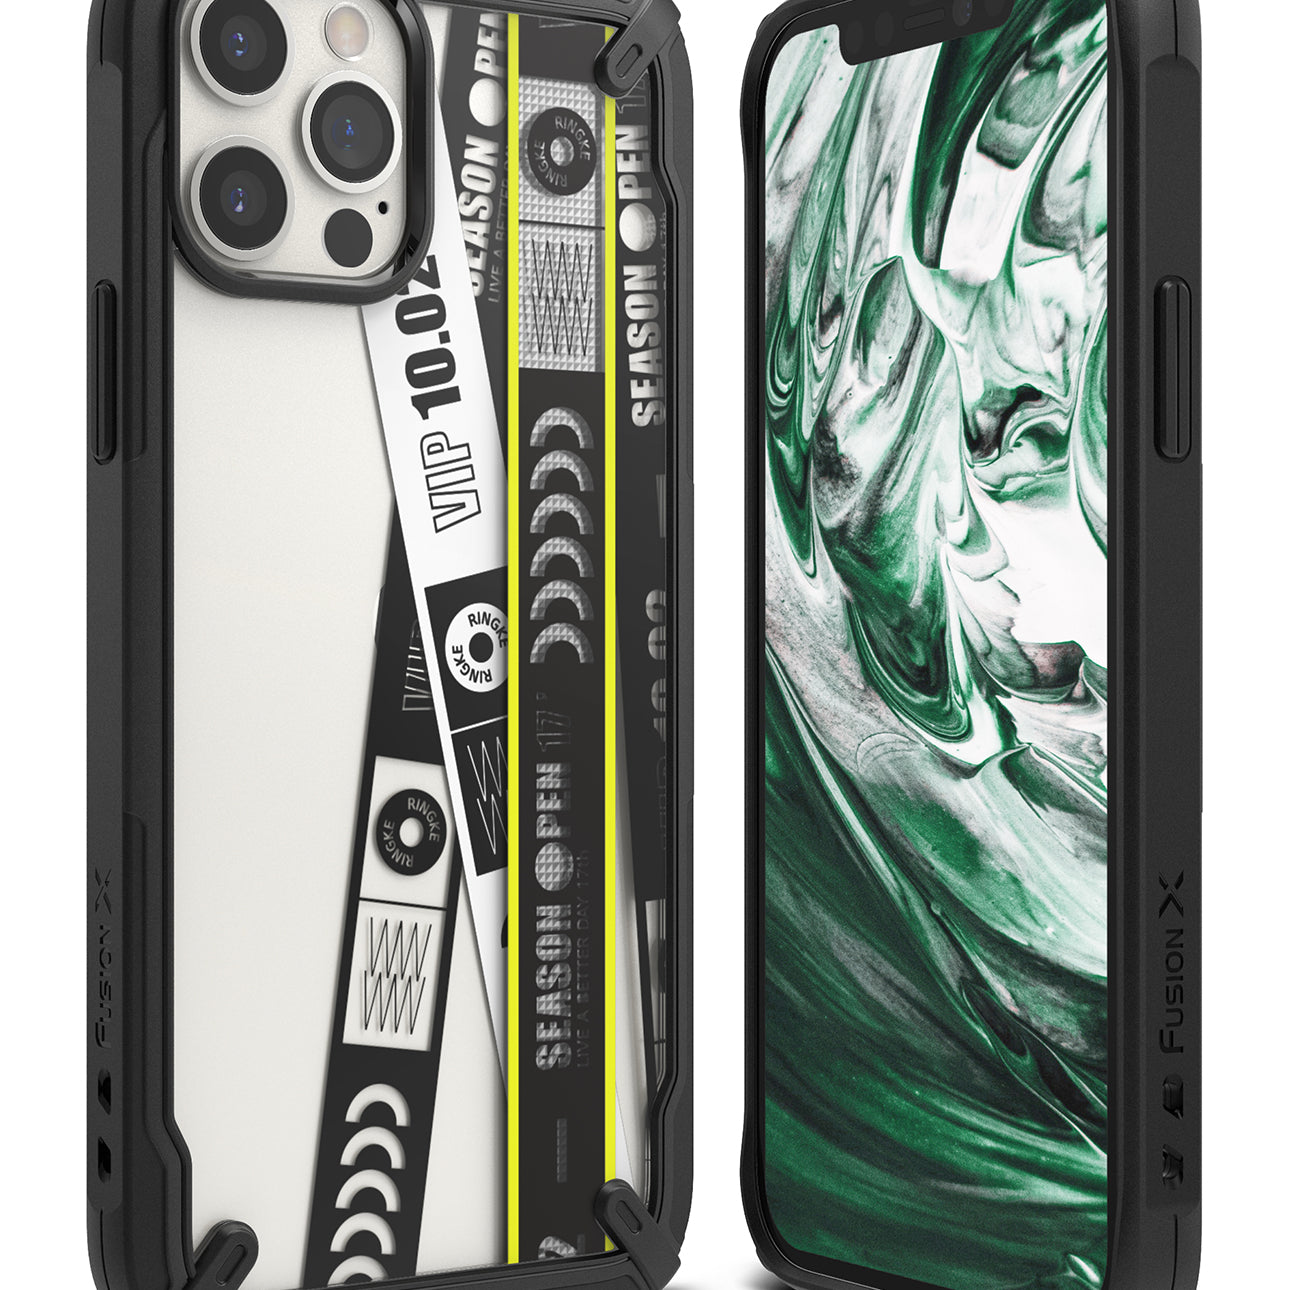 iPhone 12 Pro Max Case | Fusion-X Design - Ringke Official Store